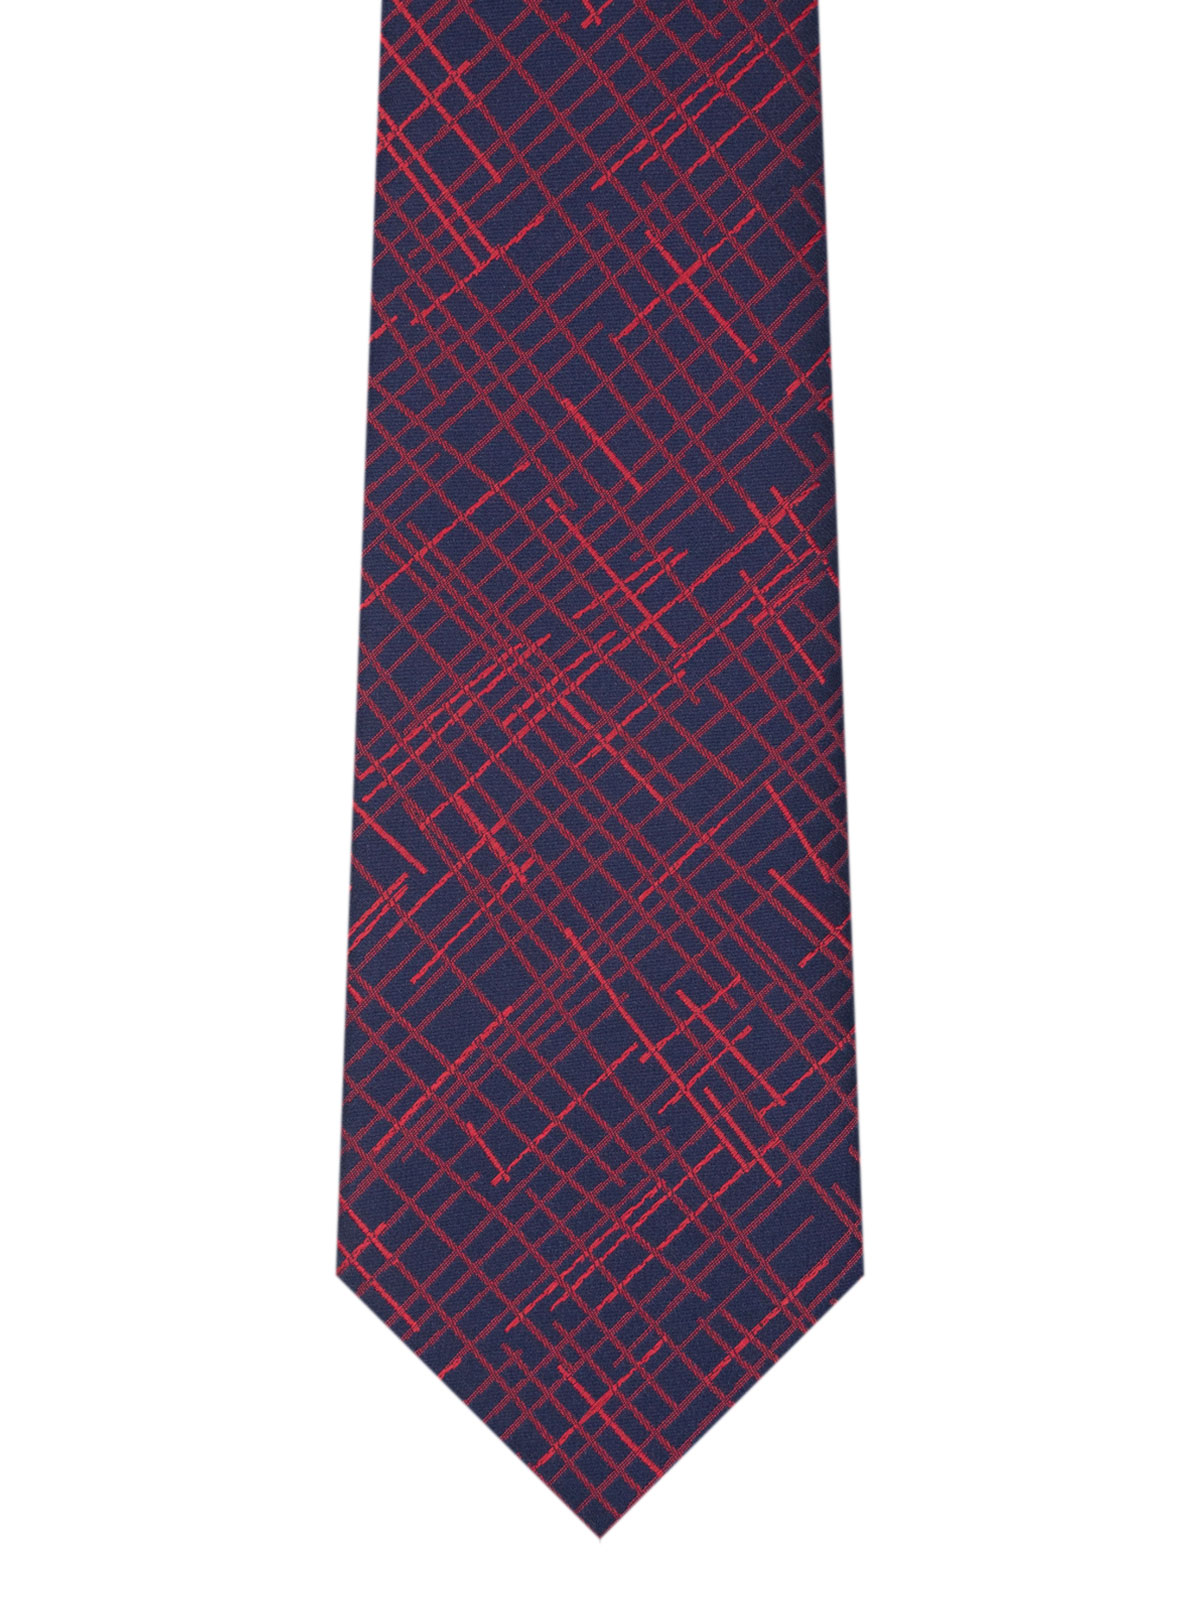 Dark blue tie with red lines - 10186 - € 14.06 img2